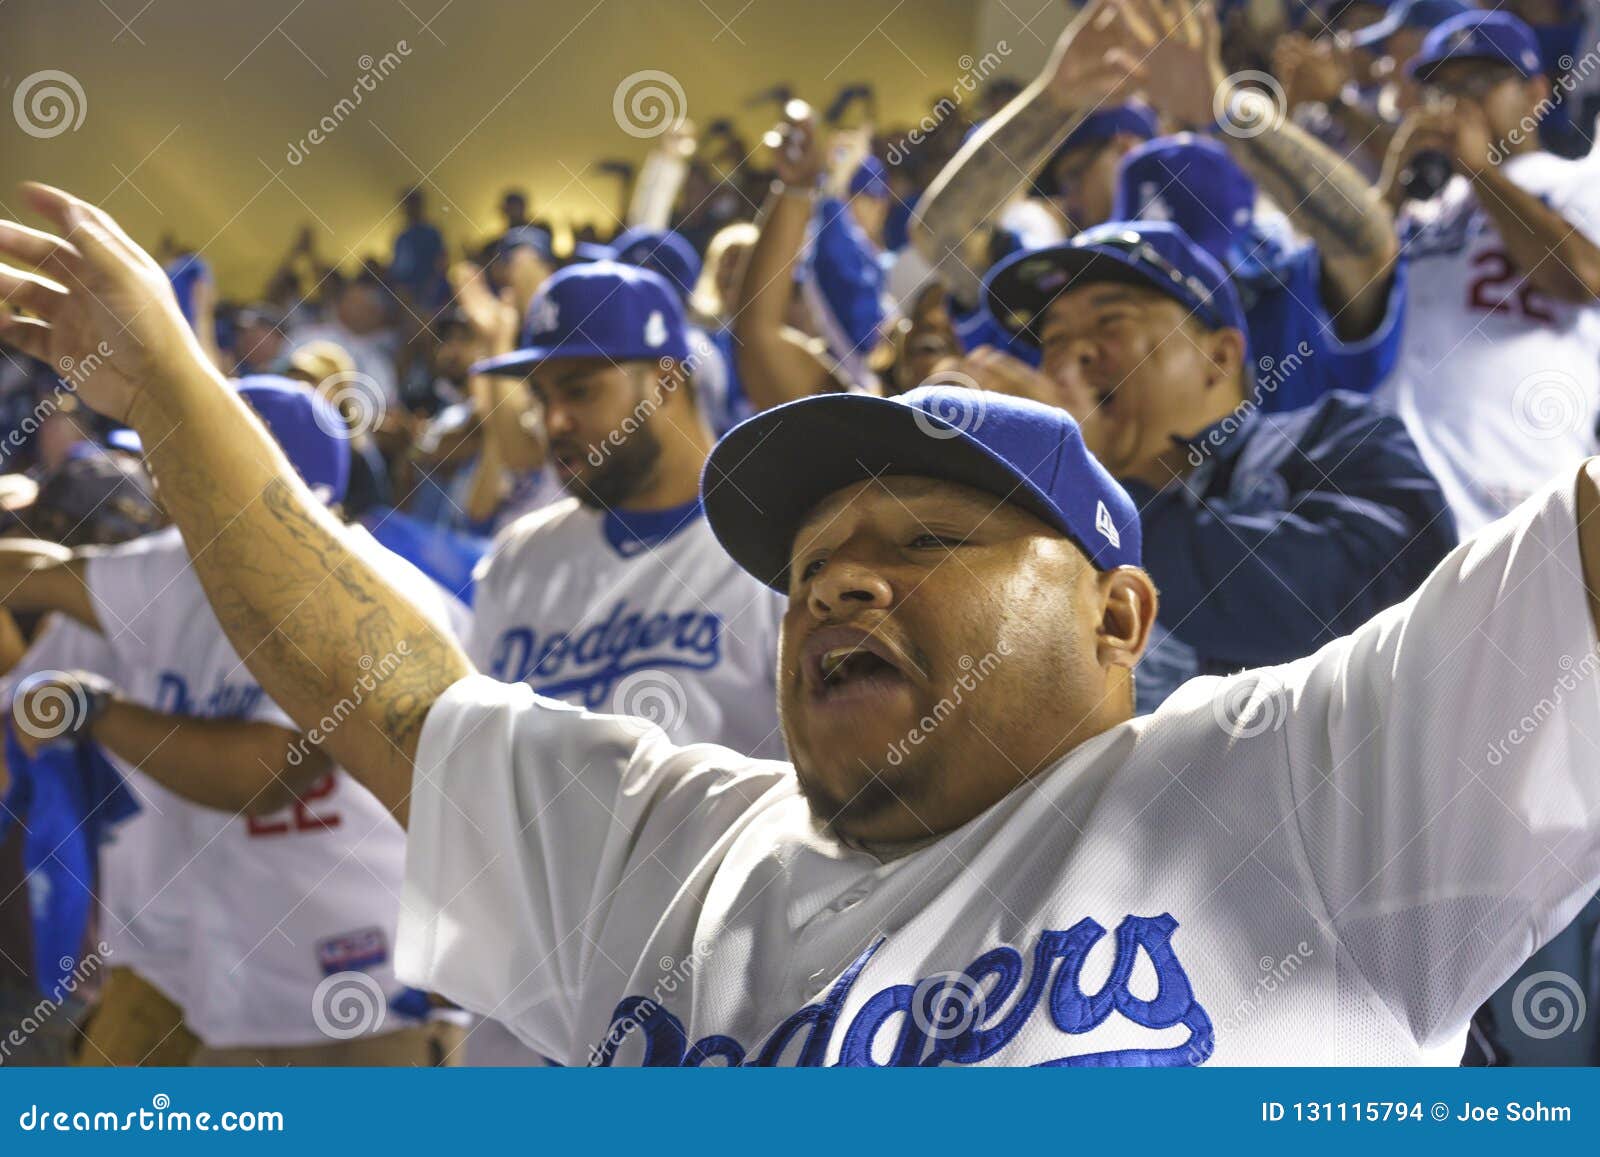 OCTOBER 26, 2018 - LOS ANGELES, CALIFORNIA, USA - DODGER STADIUM: Fans  Celebrate As LA Dodgers Defeat Boston Red Sox 3-2 in Game 3 Editorial Stock  Image - Image of crowd, stadium: 131115794